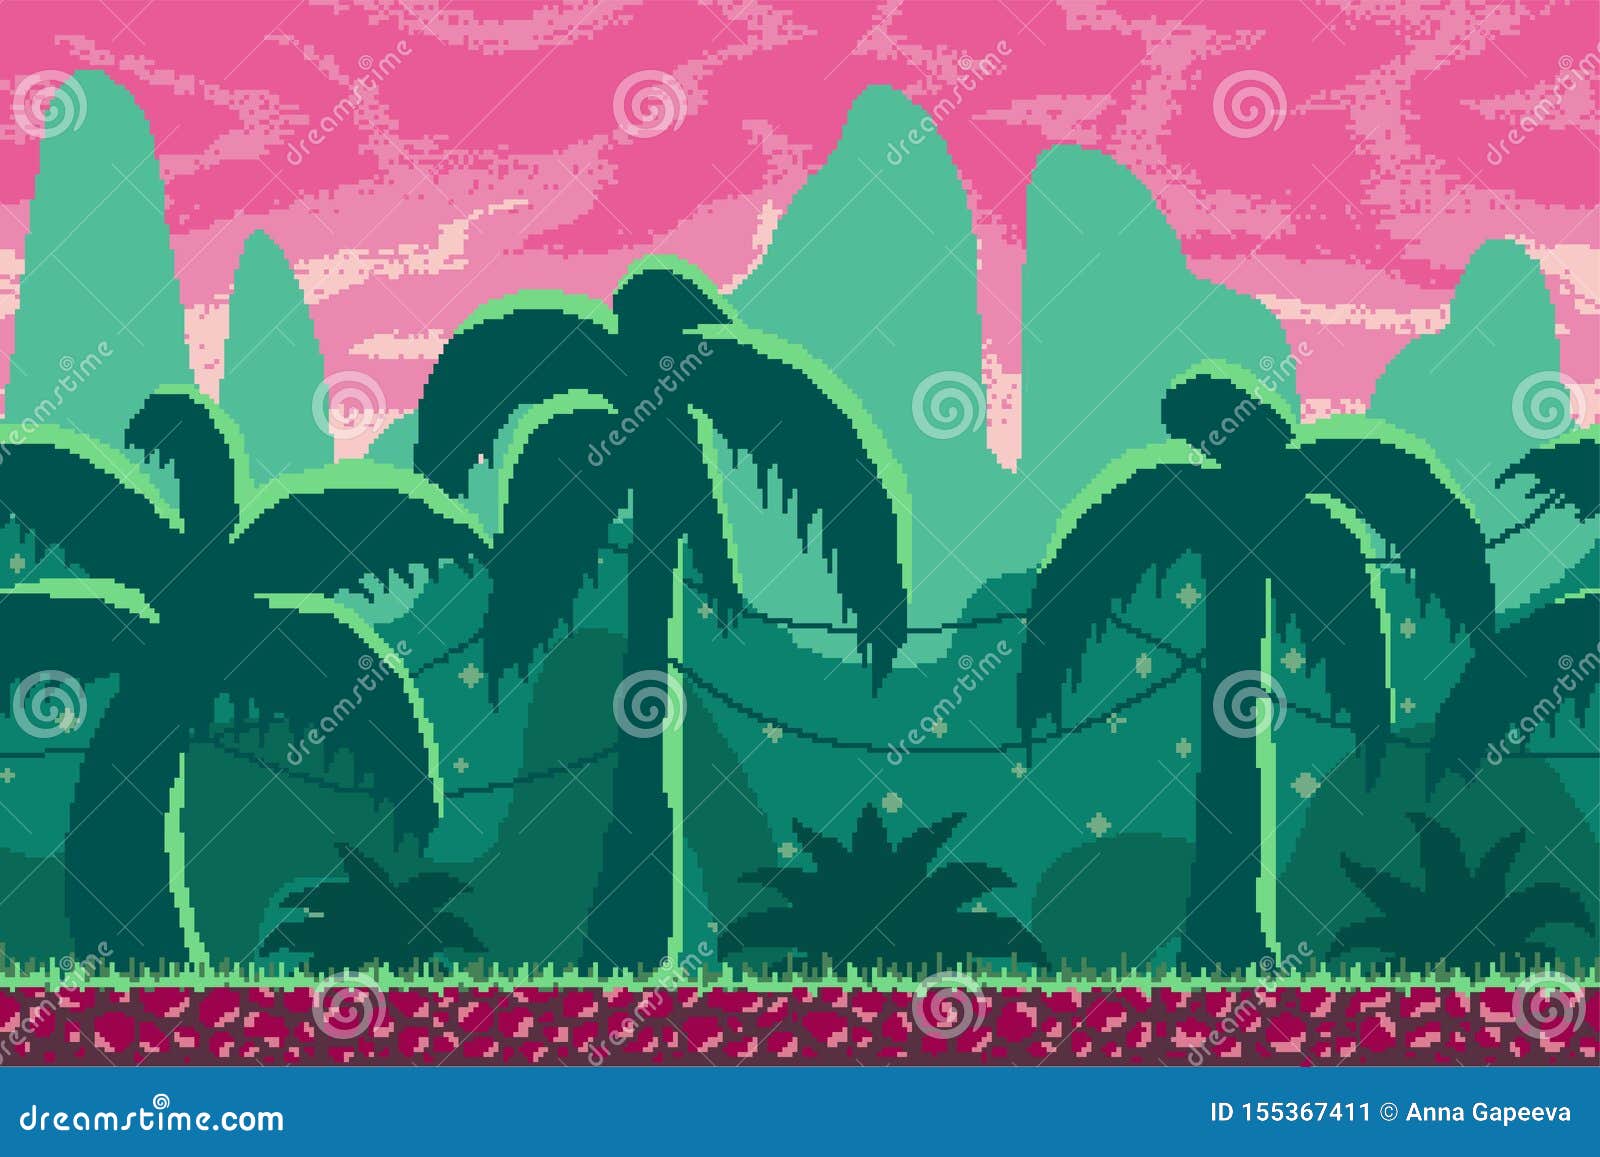 Pixel Art Background For Games And Mobile Applications Stock Vector Illustration Of Abstract Print